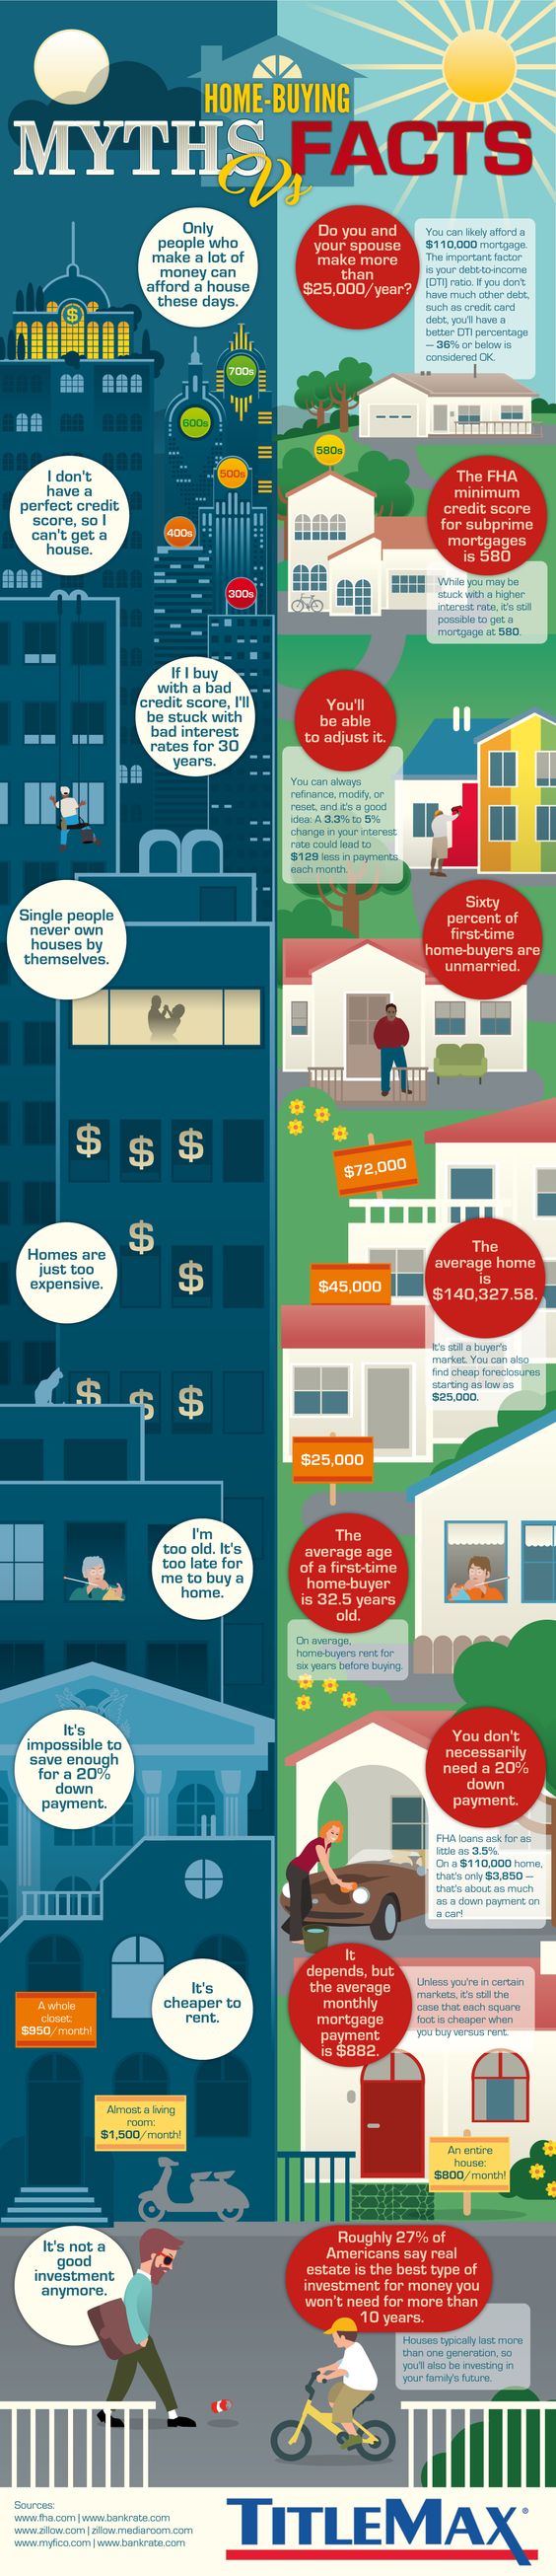 home-buying myths vs facts